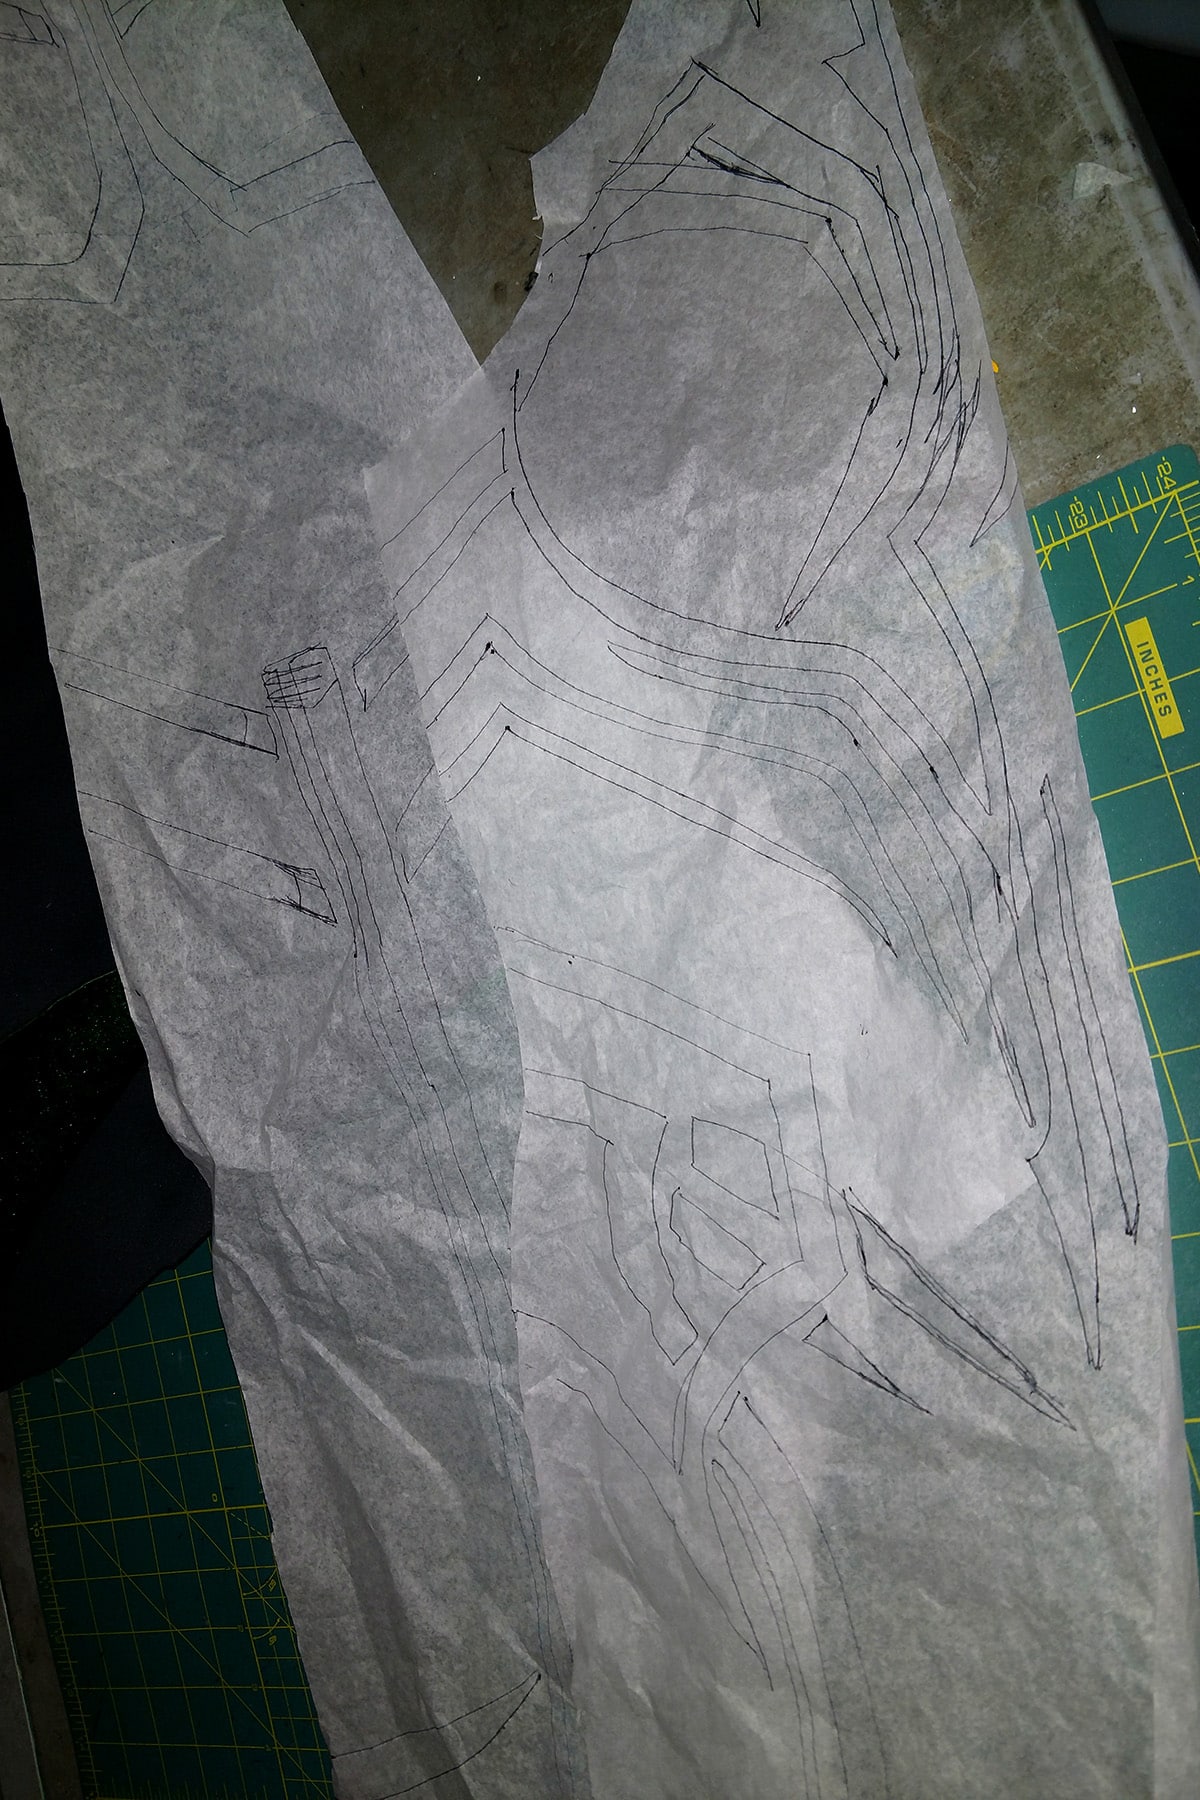 A bodysuit pattern made from exam table paper, on a green work surface.